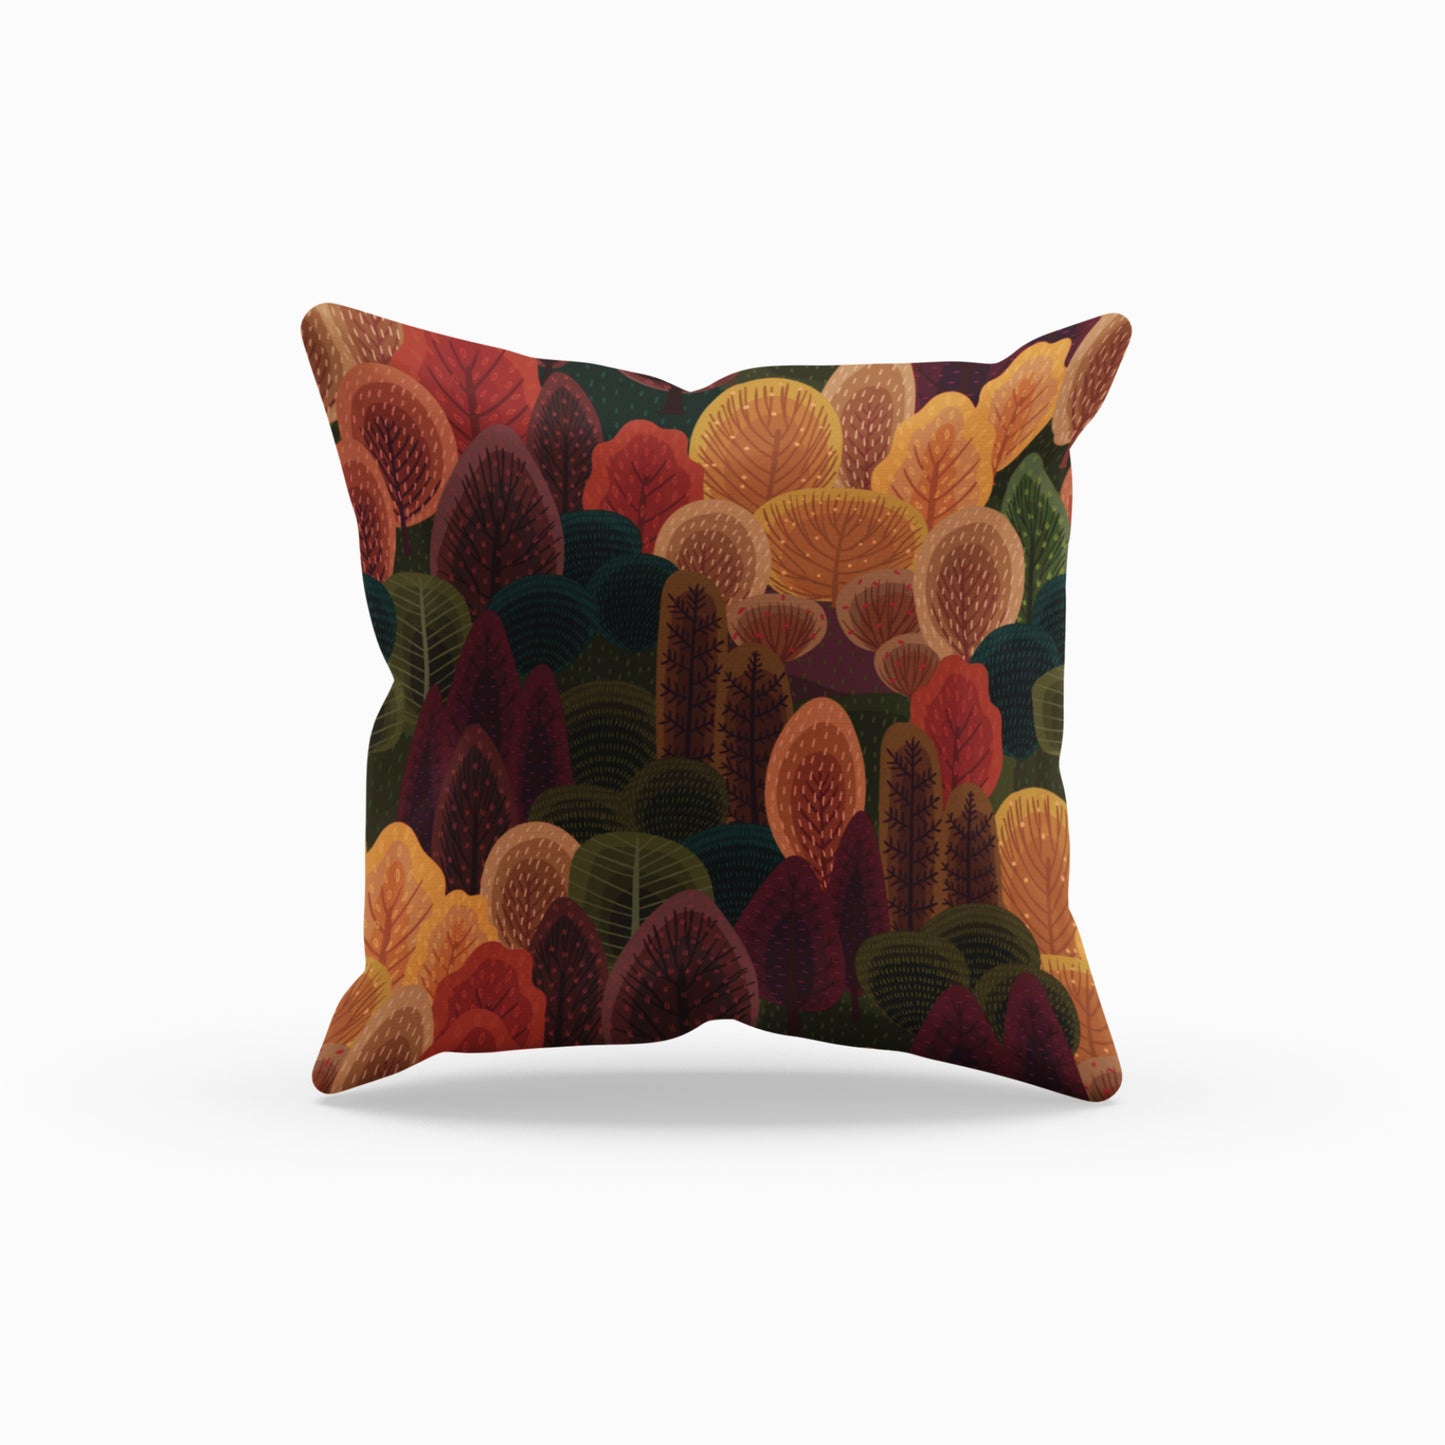 Fall Forest View Pattern Pillow, Autumn Season Decorative Cushion Cover by Homeezone